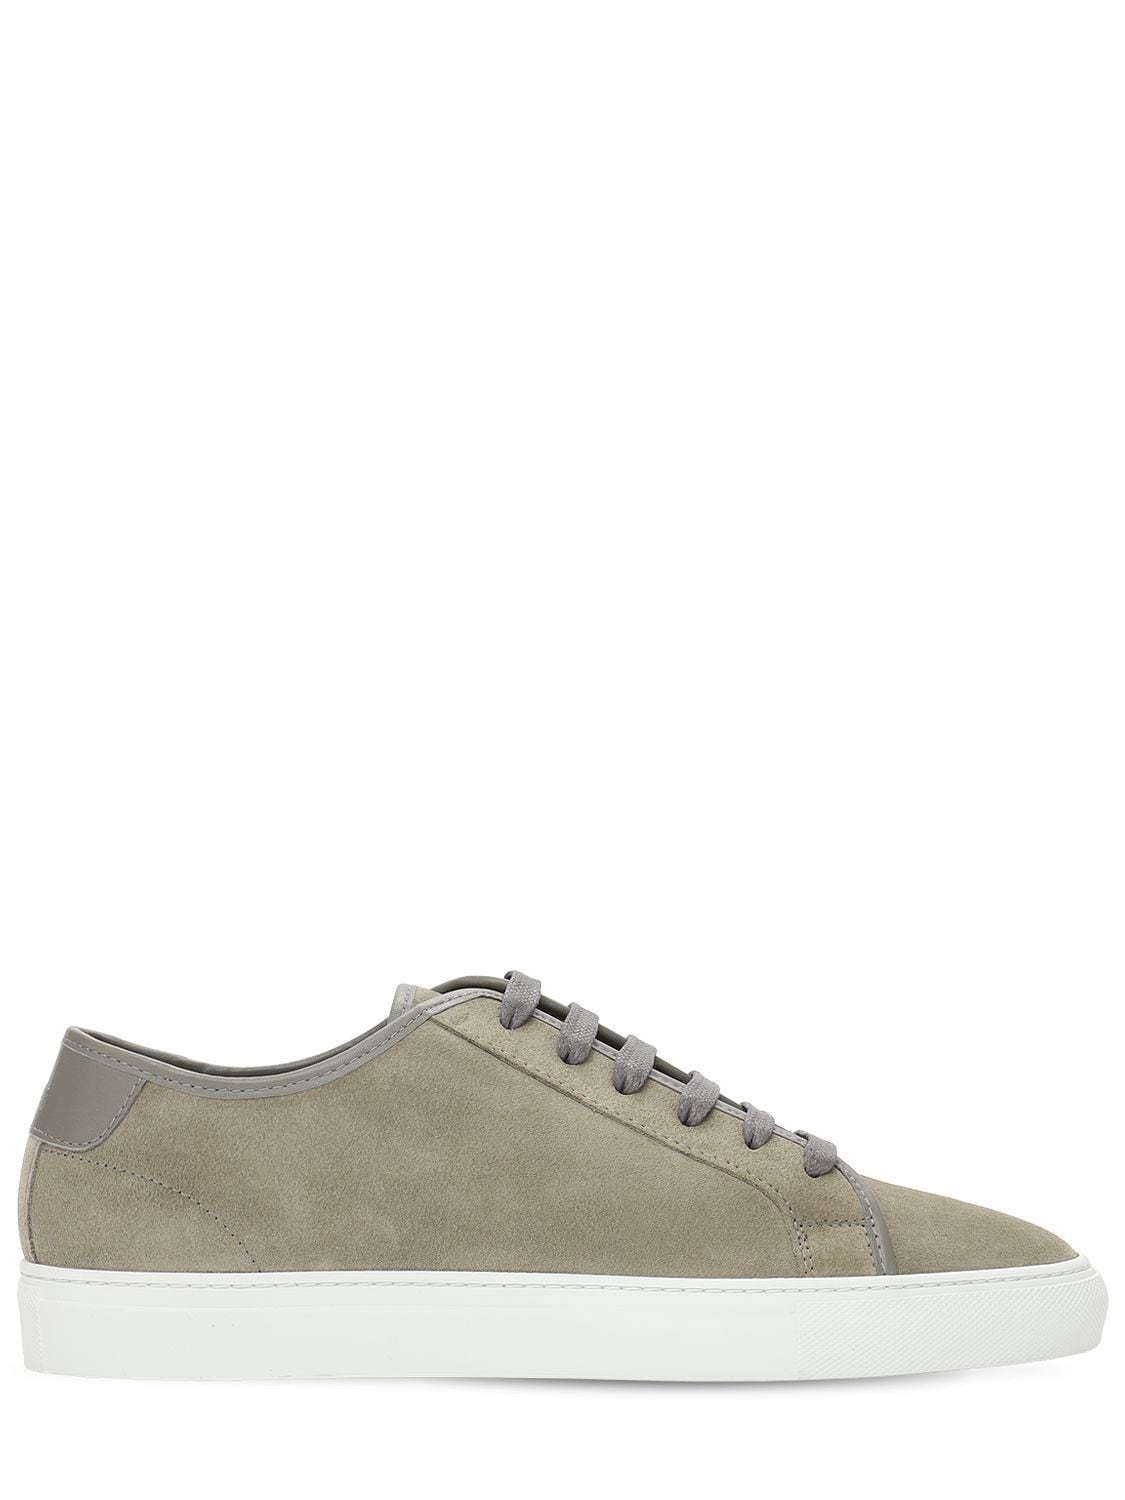 30mm Edition 3 Suede Low Sneakers